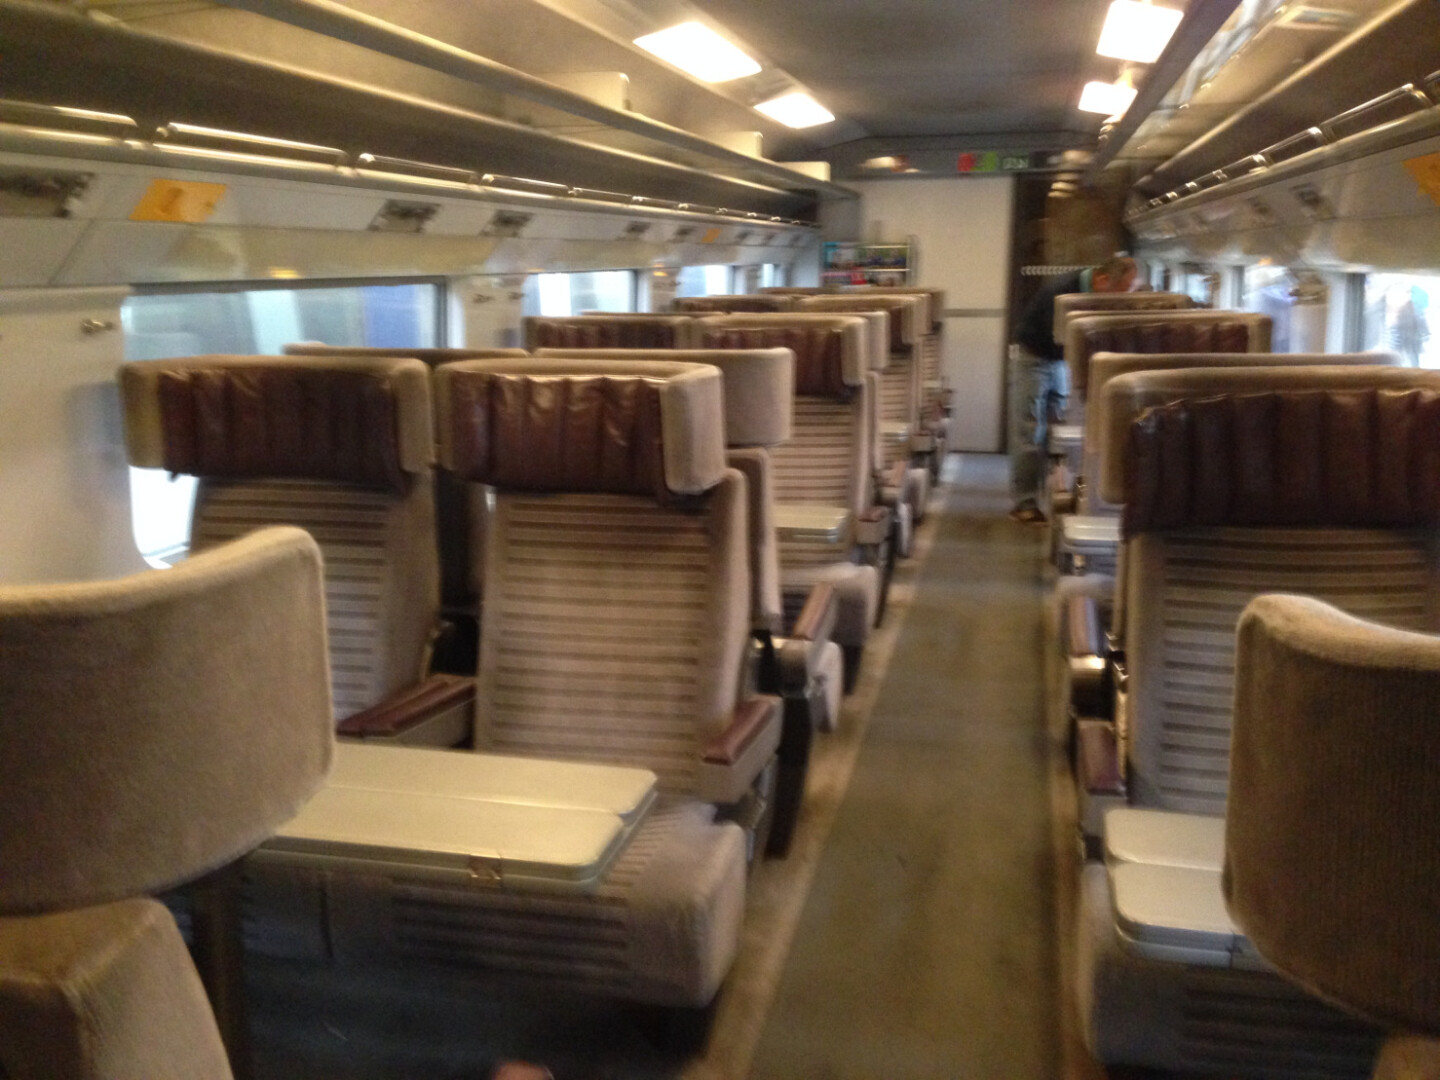 a train with seats and a person standing in the back